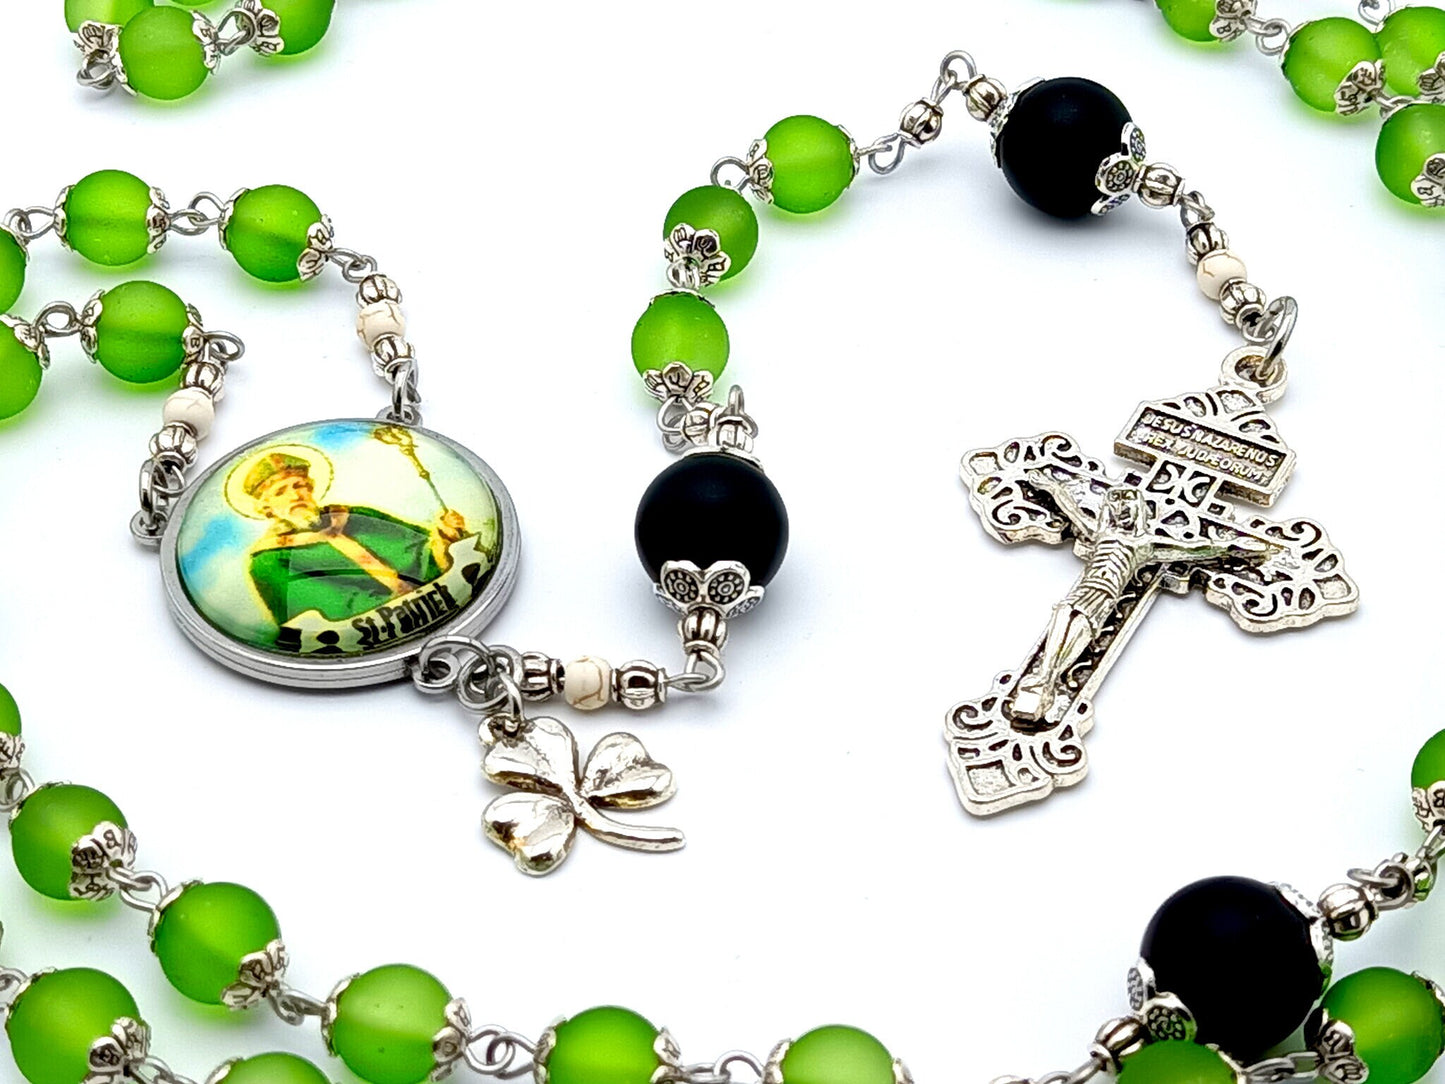 Saint Patrick unique rosary beads with green glass and matt black onyx beads, silver pardon crucifix and picture centre medal and shamrock.